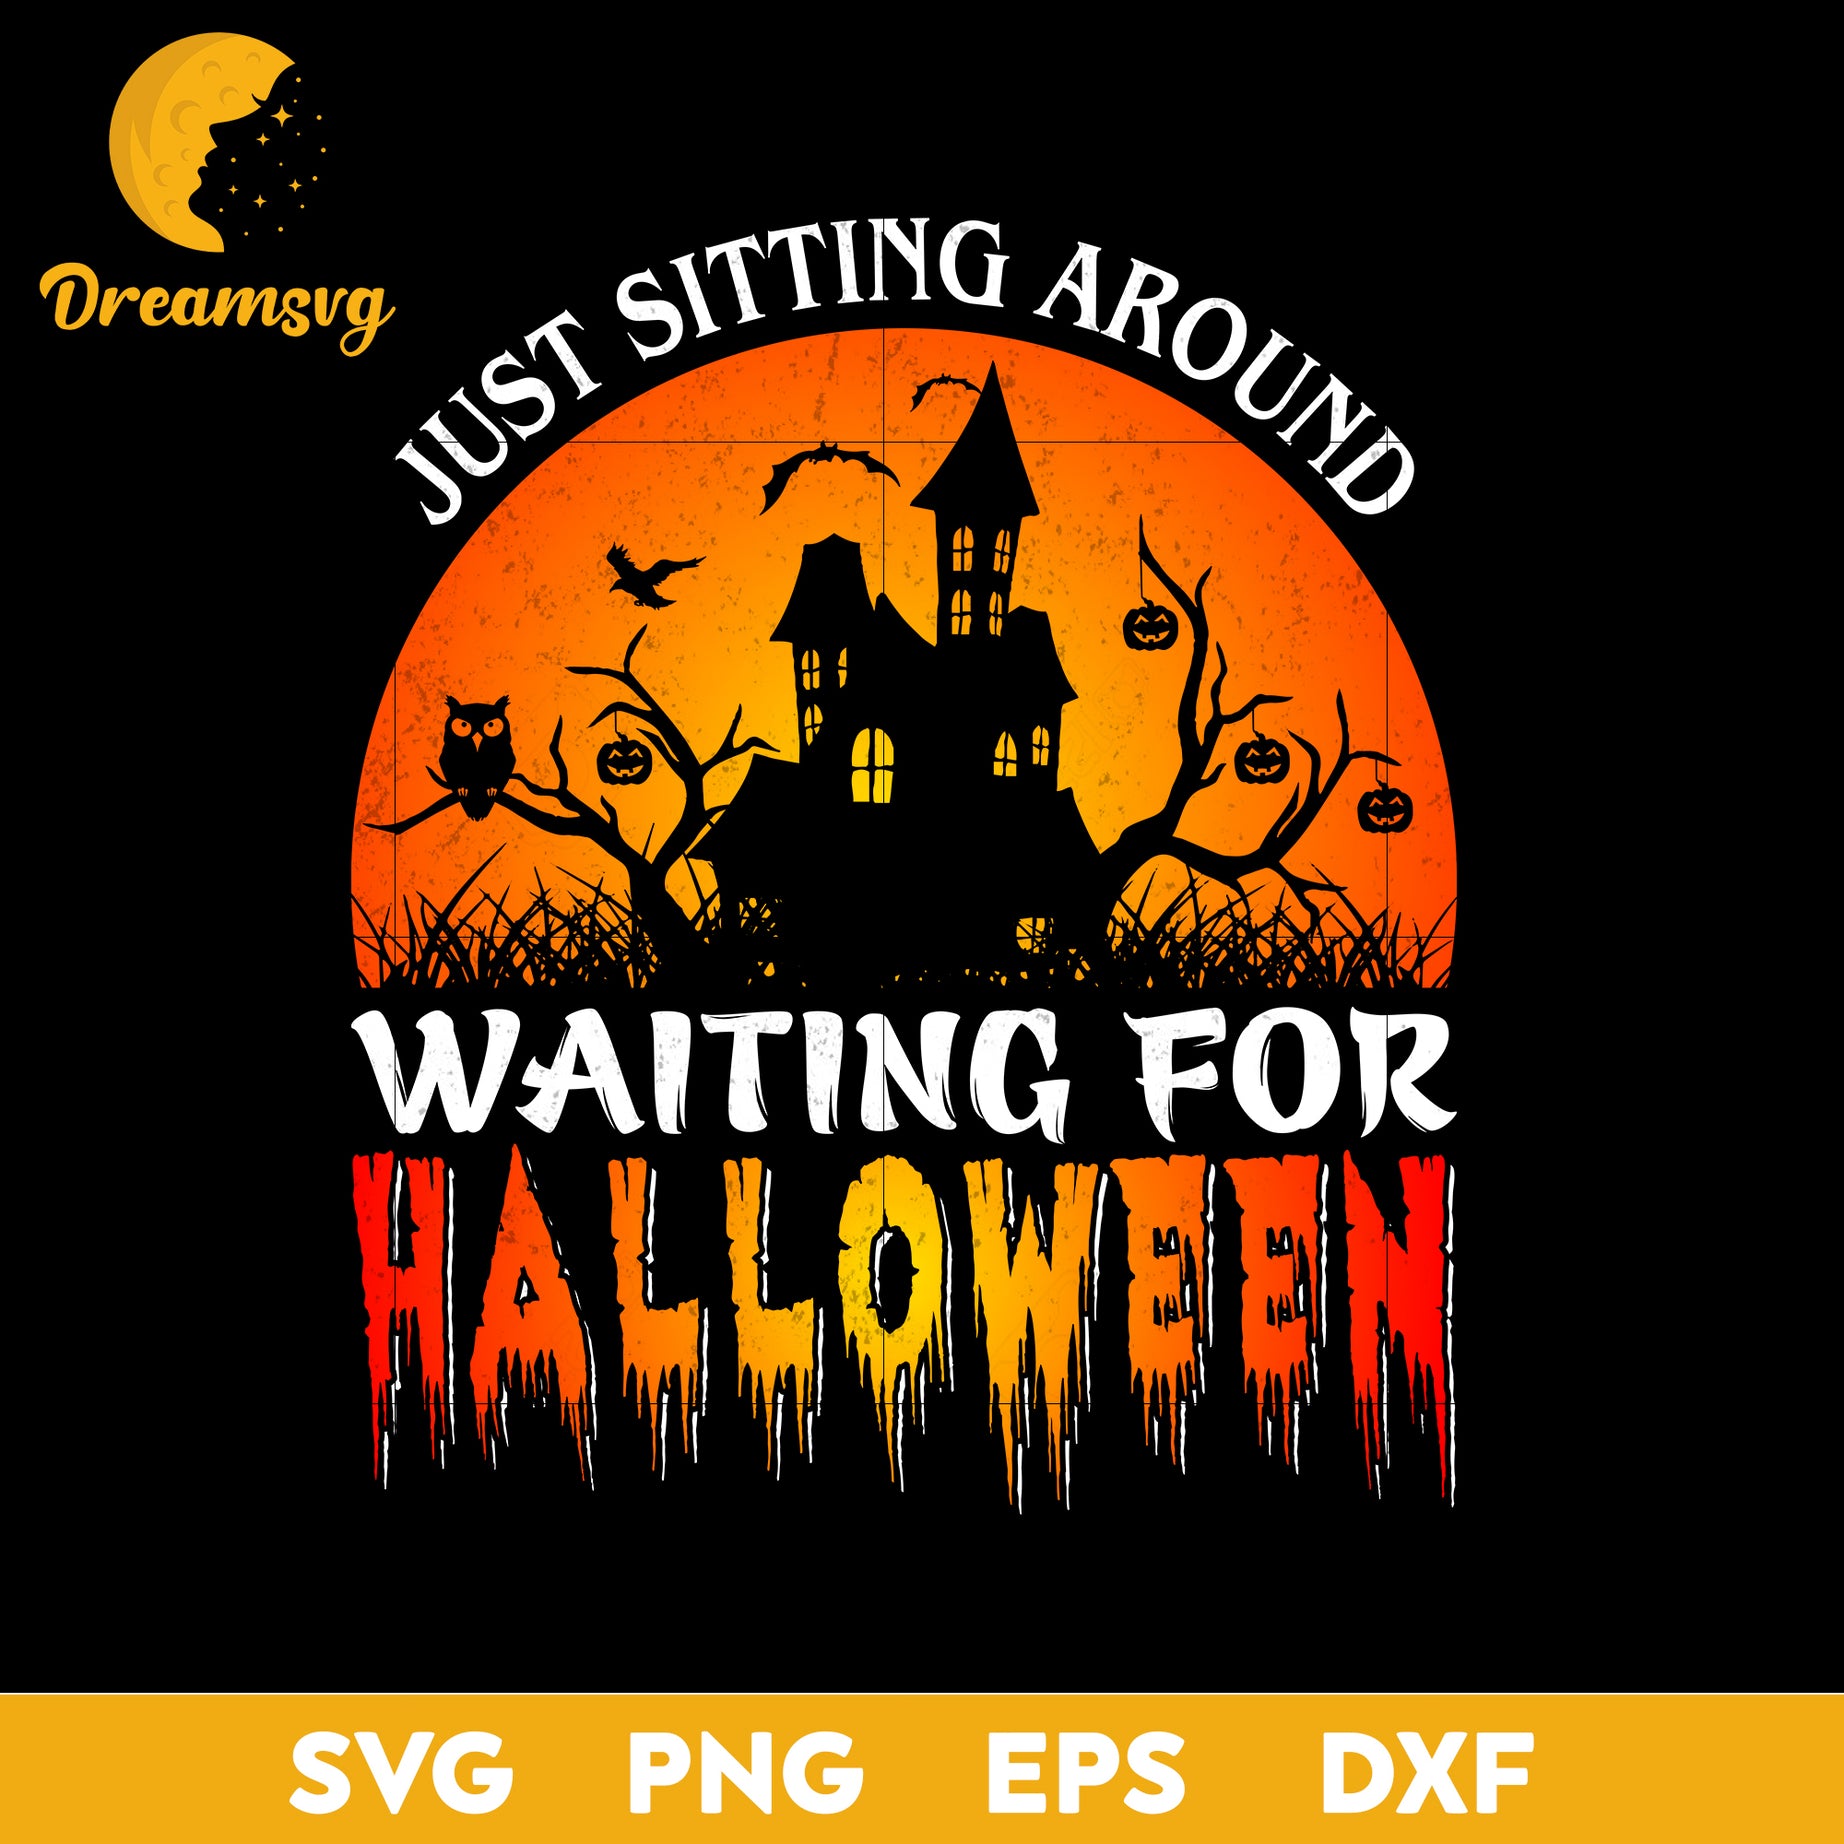 Just sitting around waiting for halloween svg, Halloween svg, png, dxf, eps digital file.